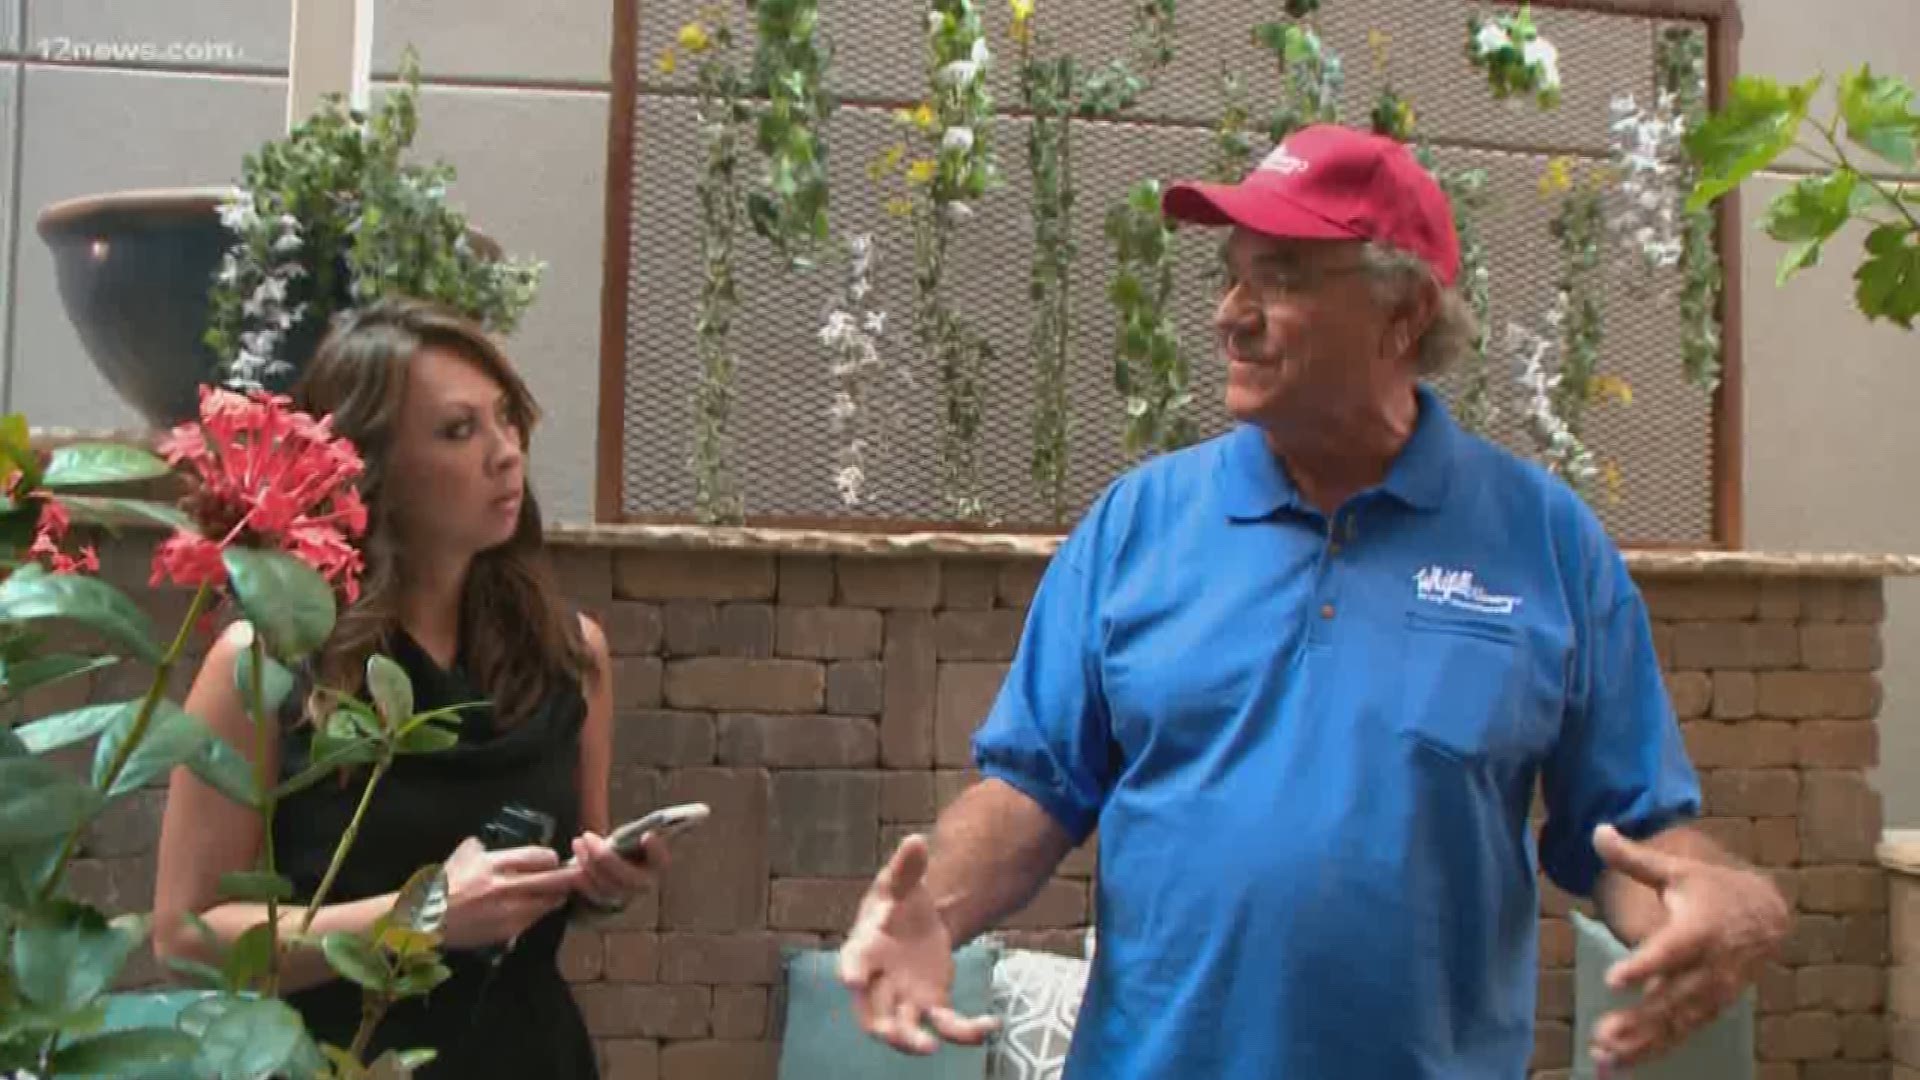 If you have a green thumb you might want to check out this video. We ask gardening expert, Brian Whitfill of Whitfill Nursery, about how to take care of your plants throughout the year in the desert.